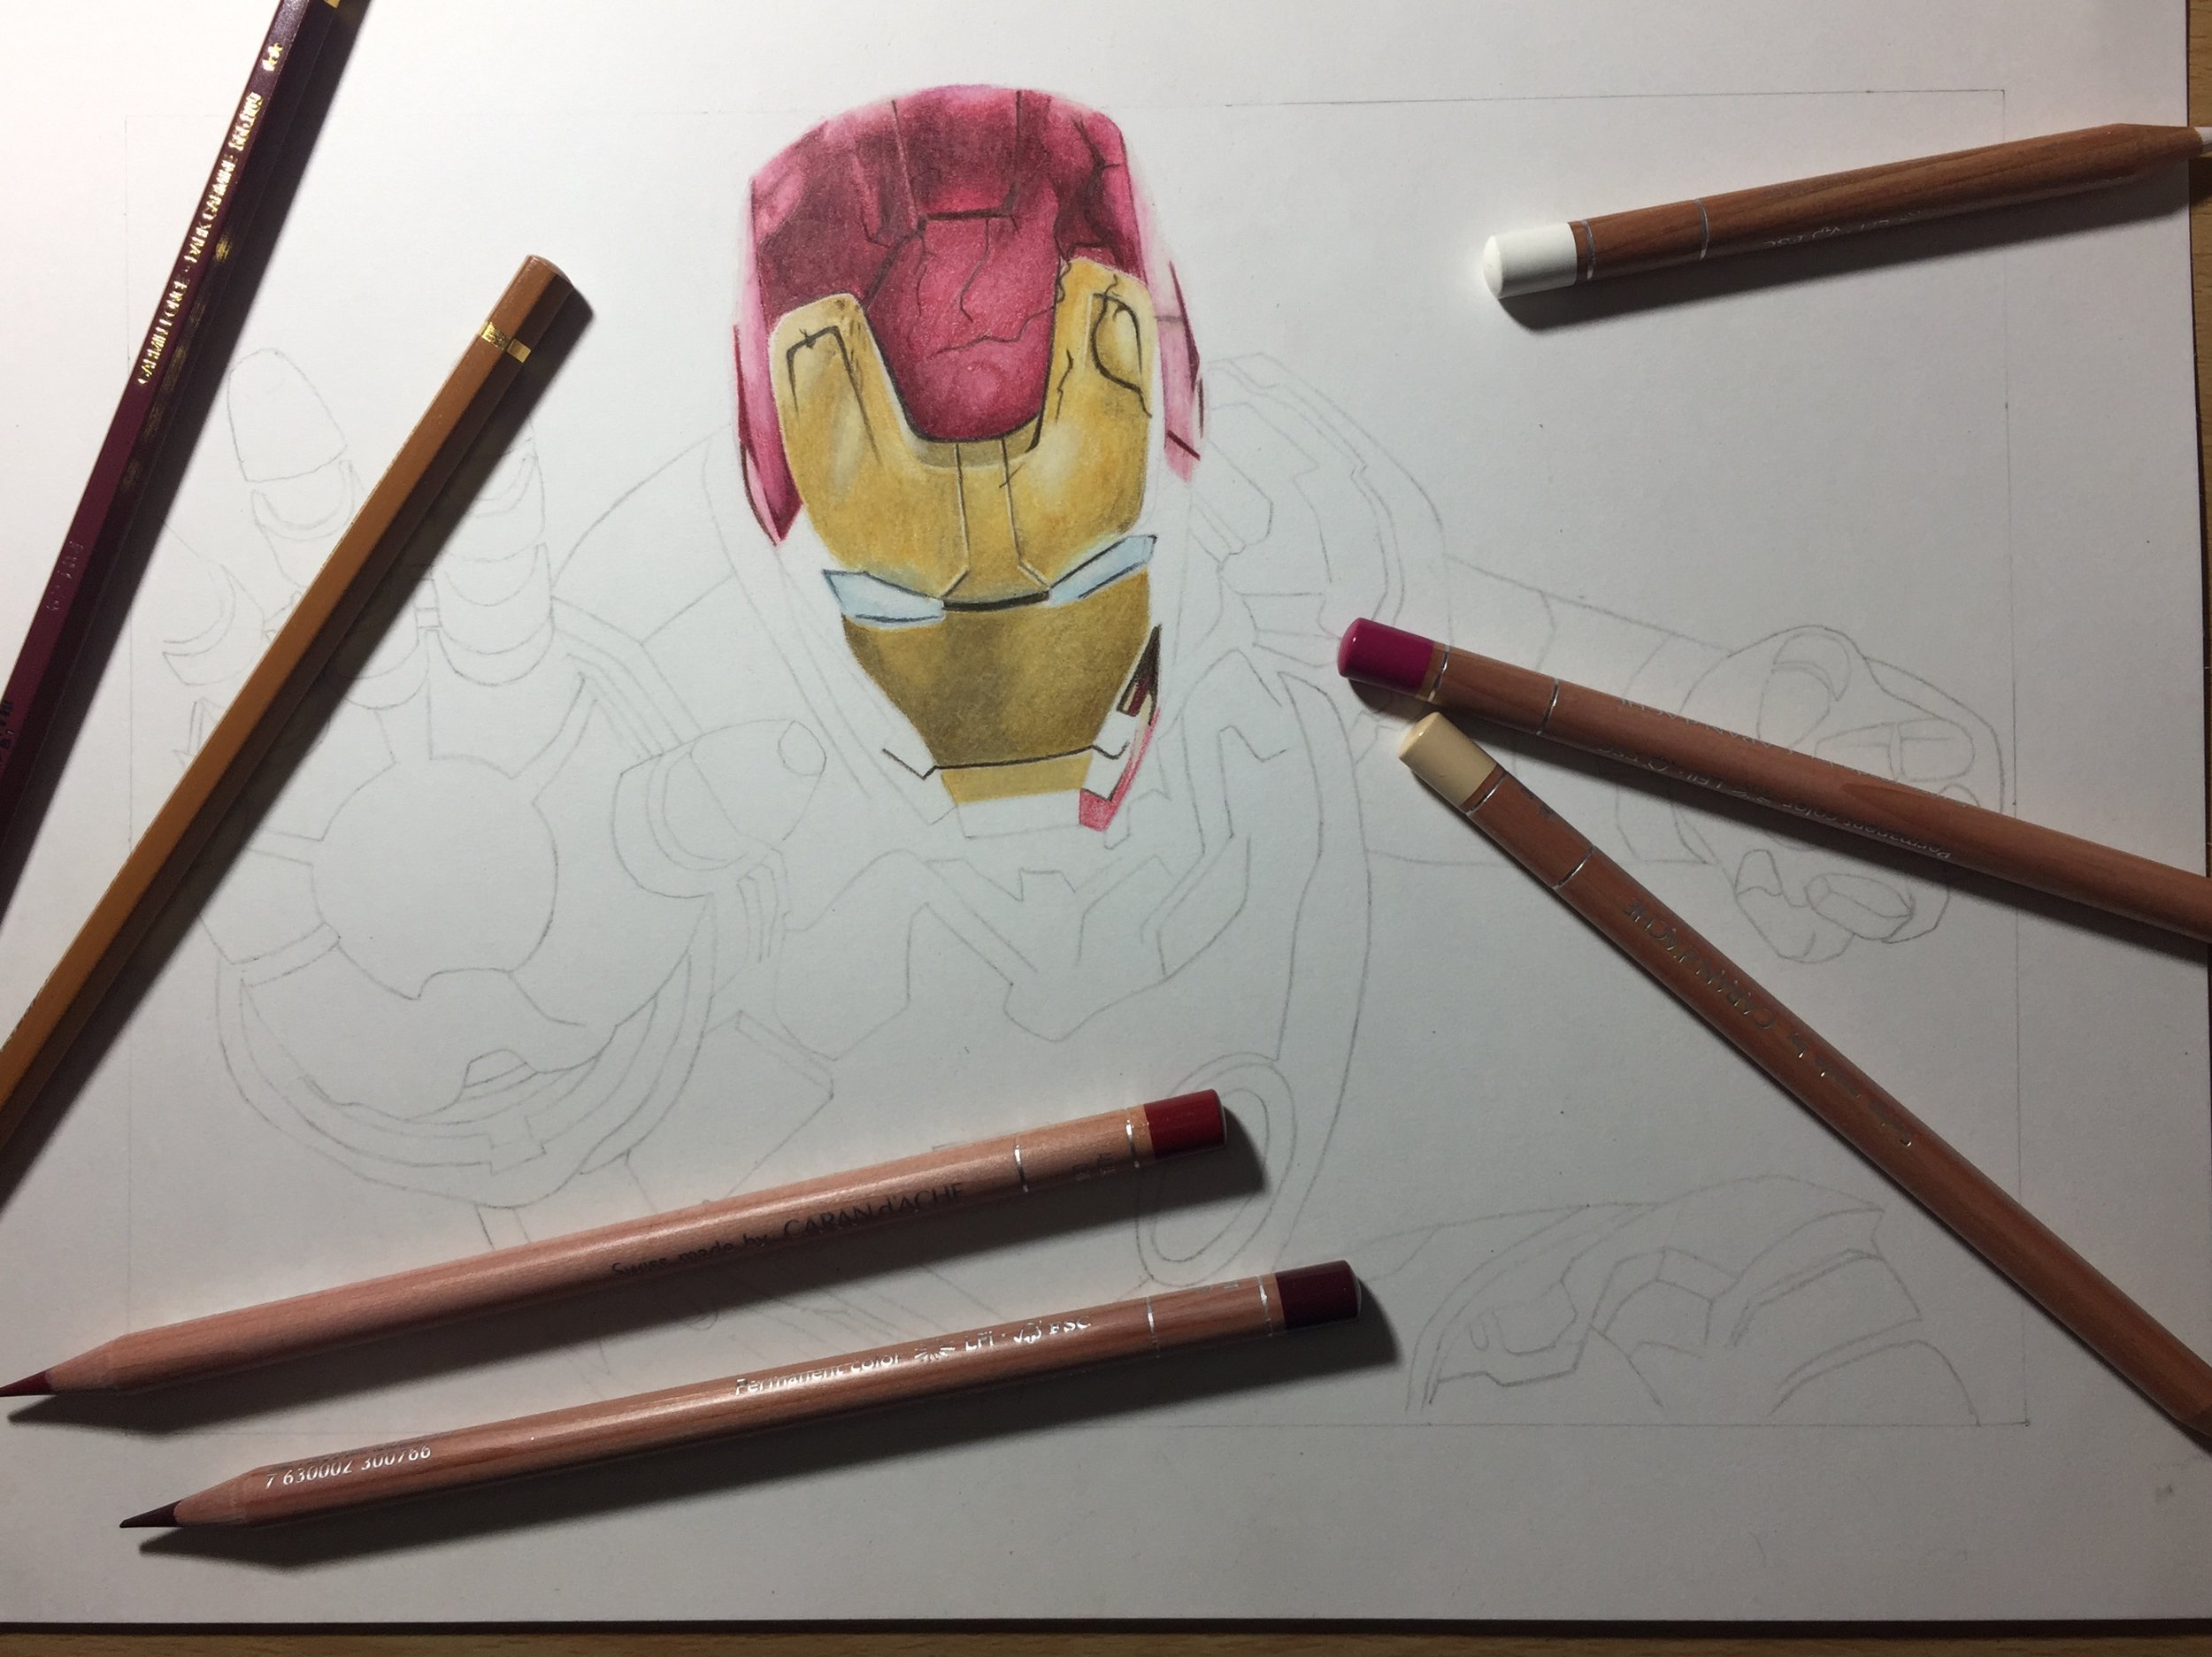 How to Draw Classic Iron Man